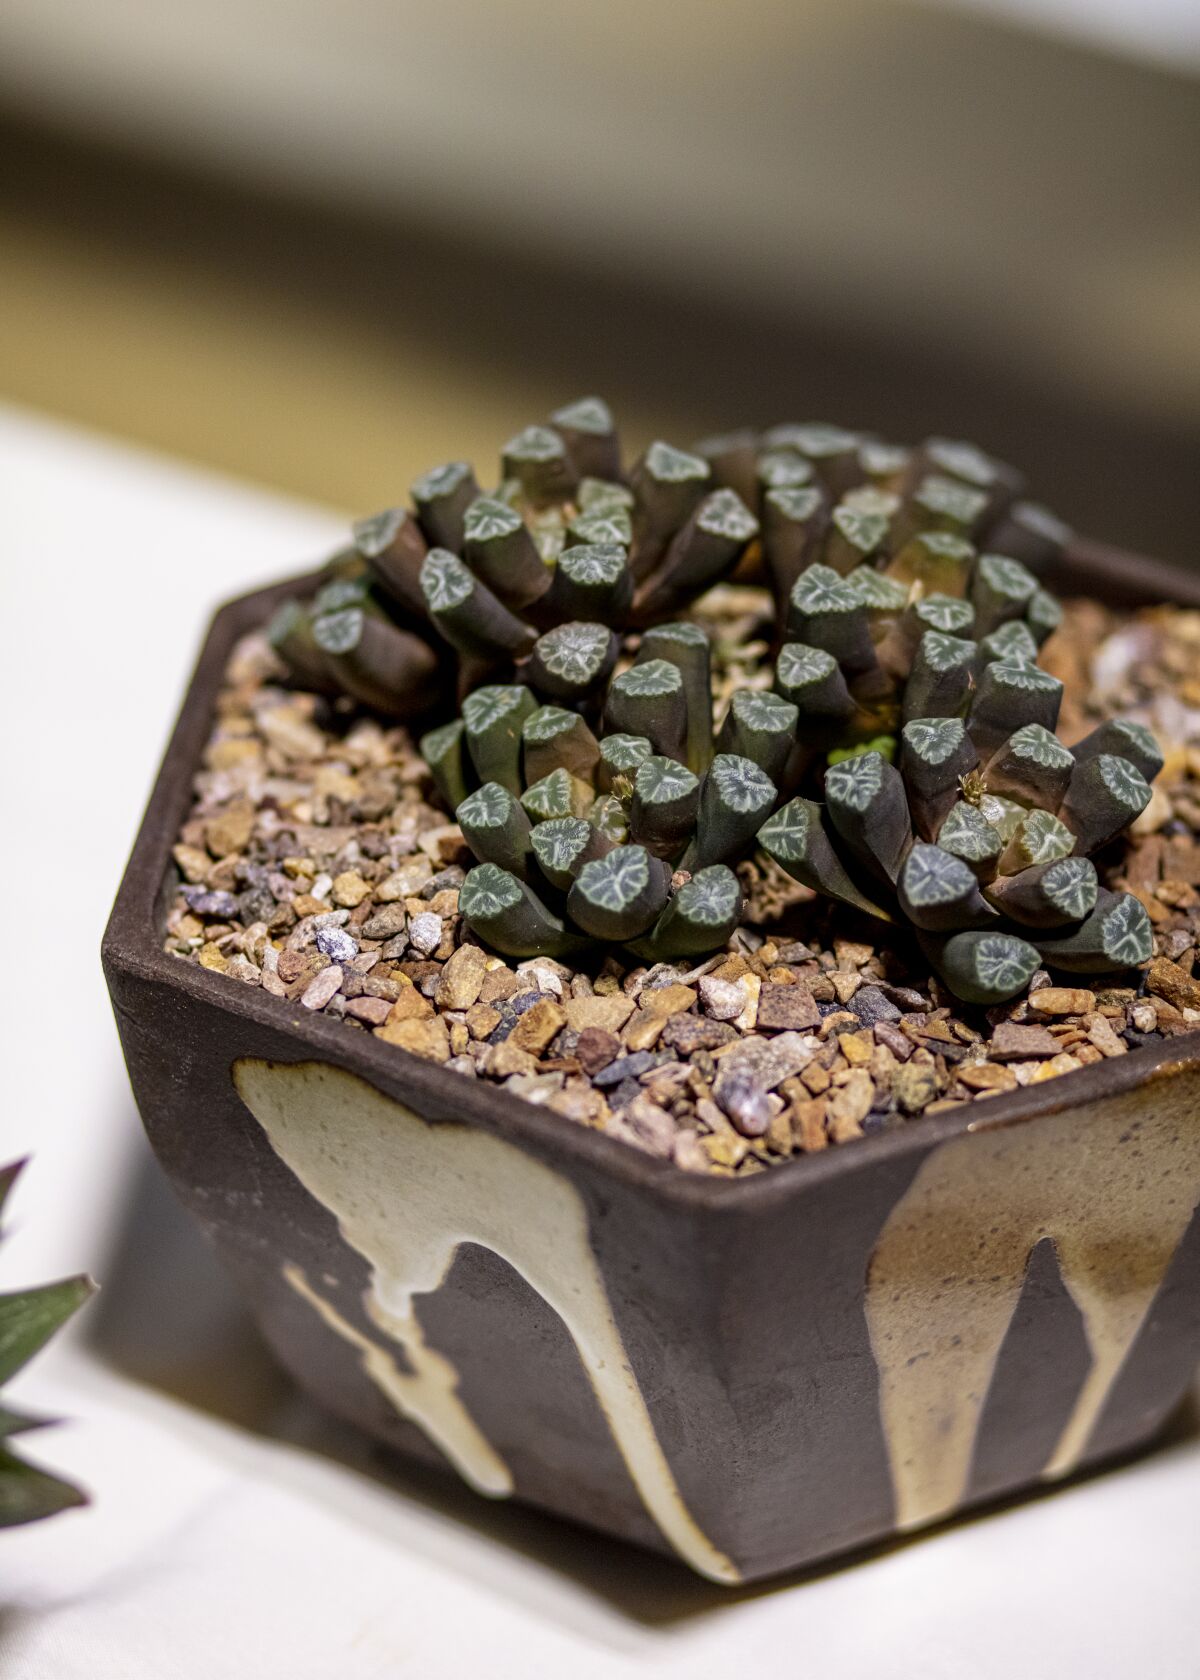 A Haworthia maughanii from growers Tom and Jeanette Glavich.